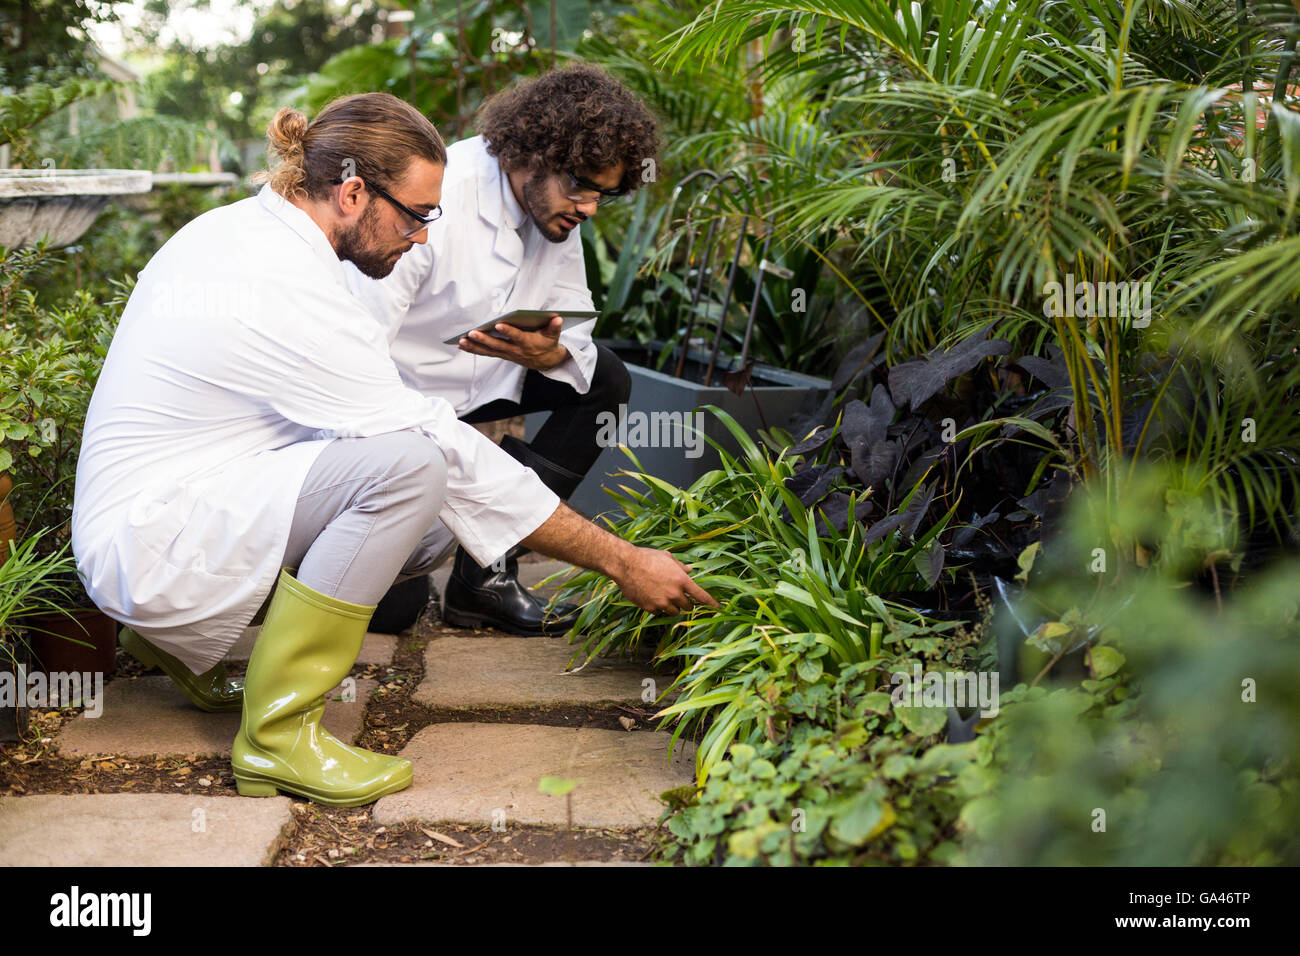 Male scientists inspecting plants Stock Photo